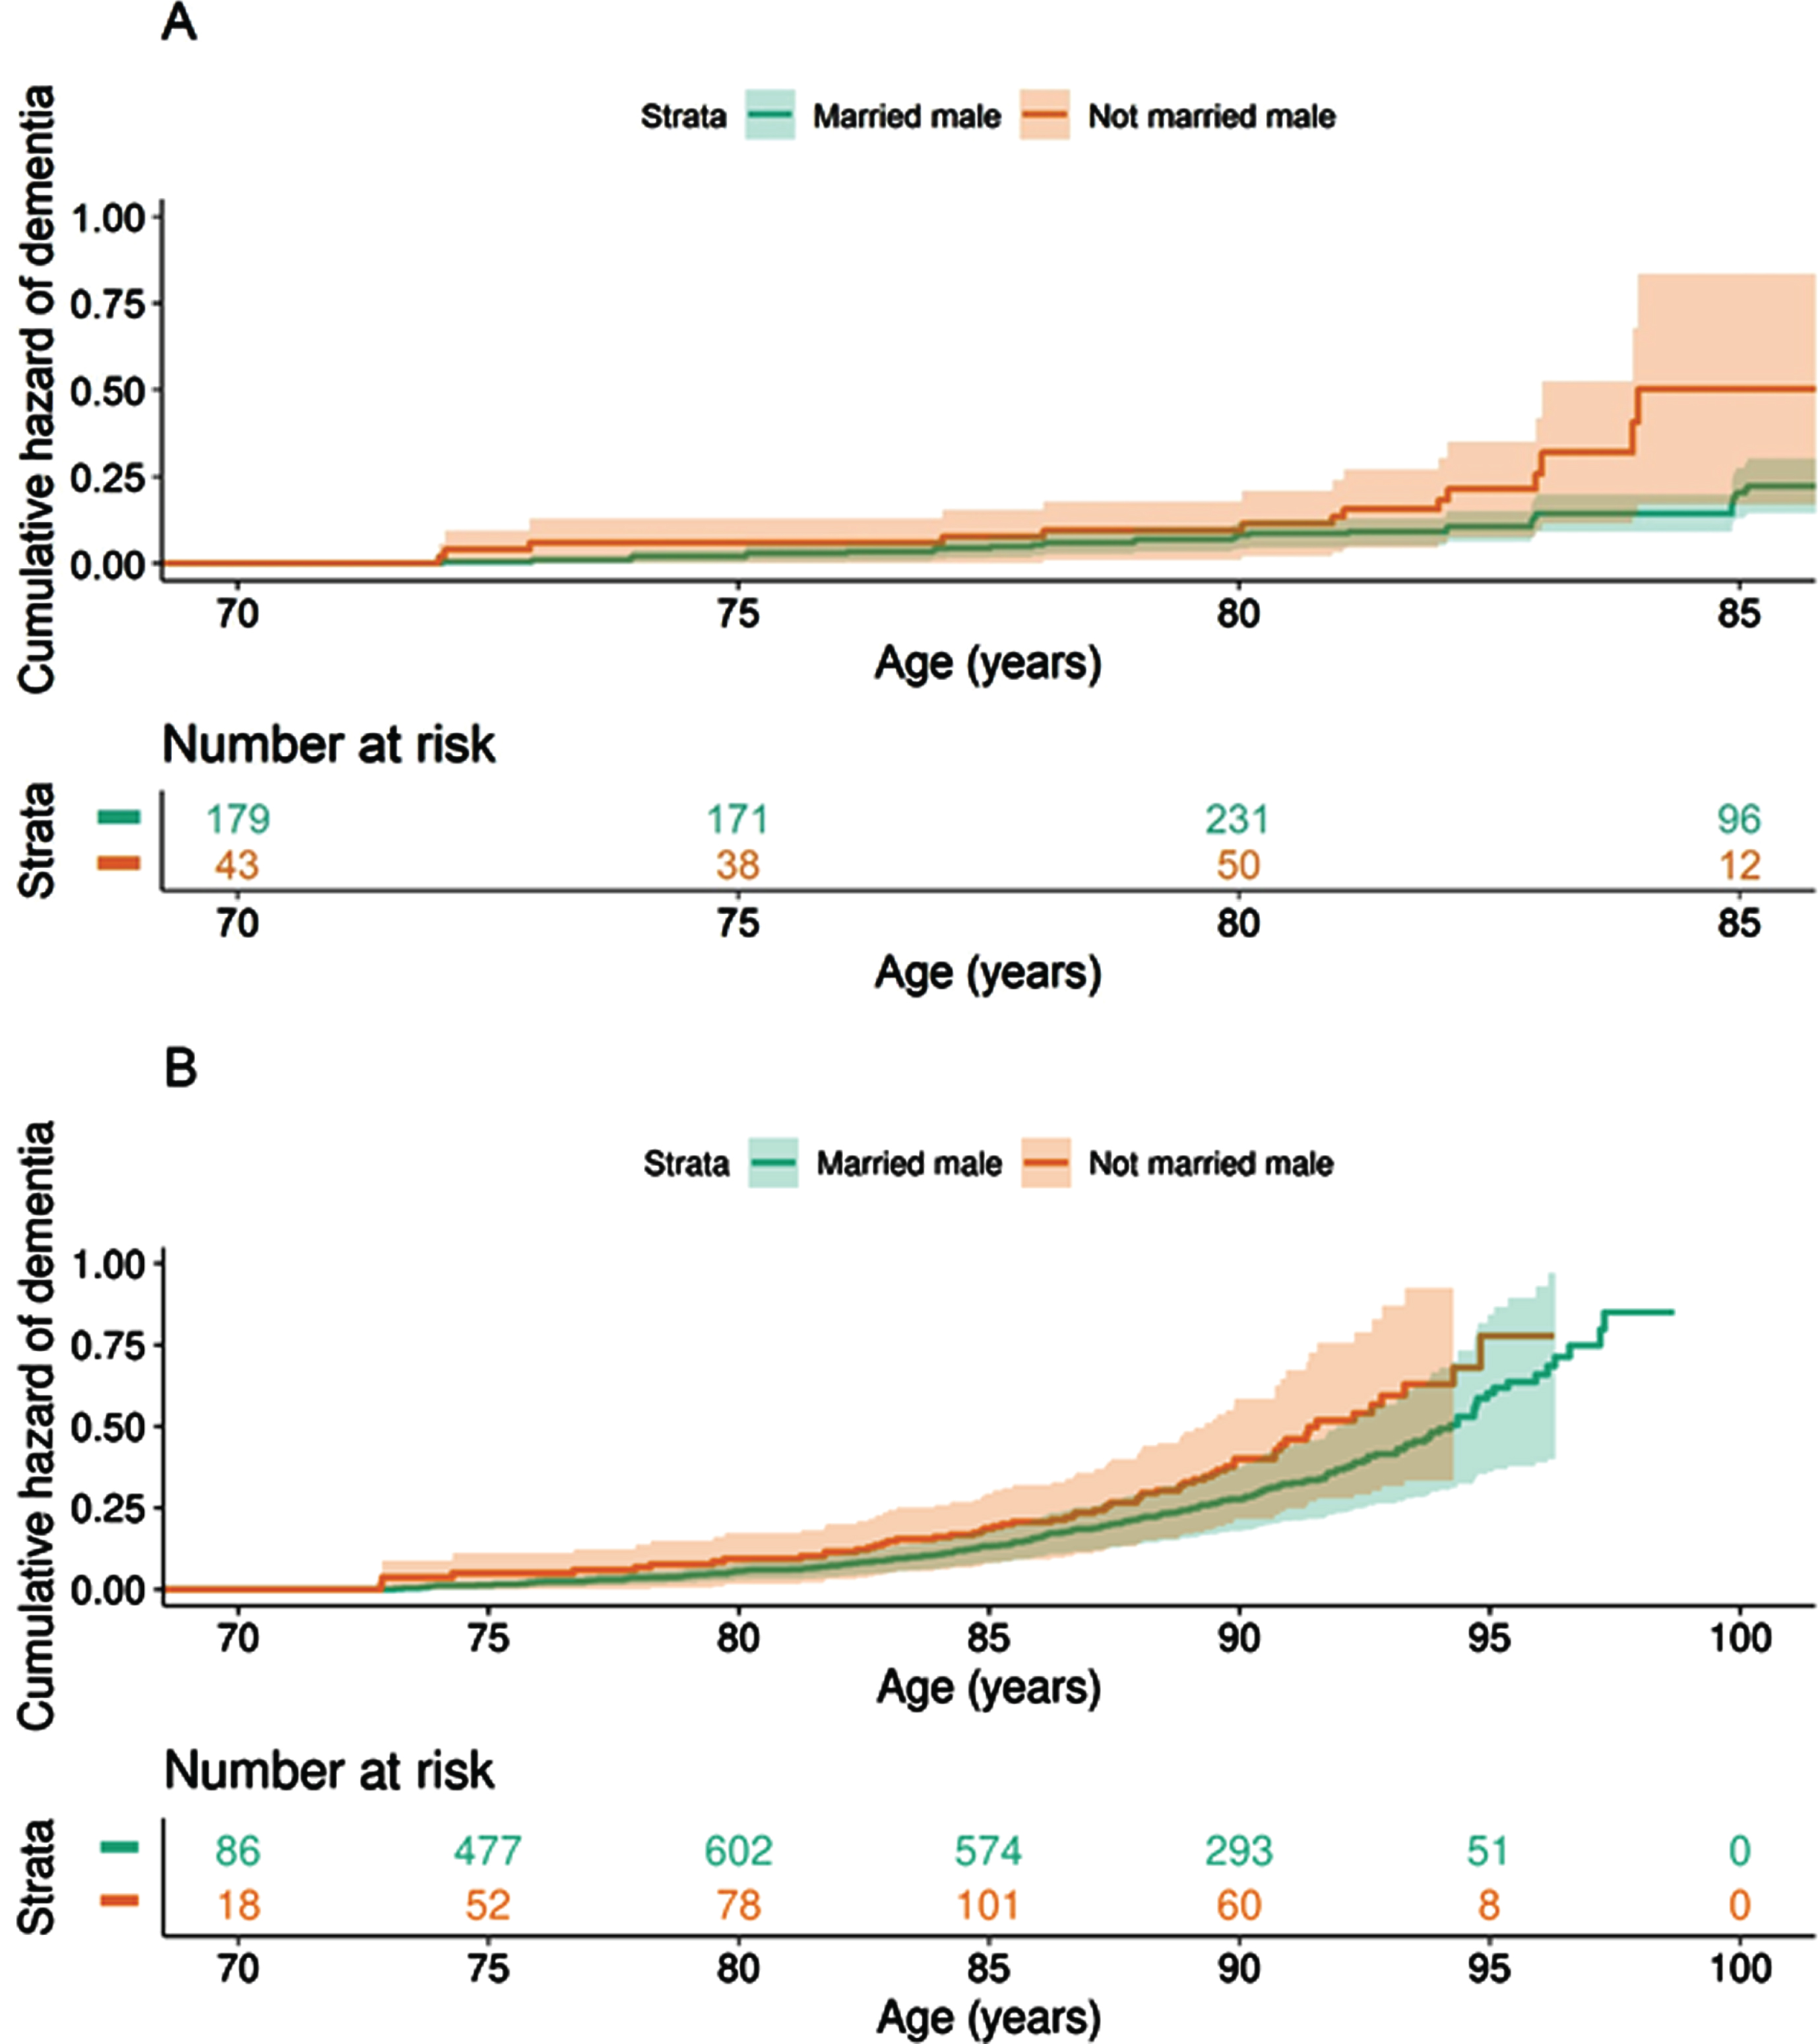 Cumulative hazard of dementia by marital status among men, in (a) H70-study and (b) MCSA 70+ study. “Marrieds” include those married and cohabiting with a partner, while “not married” include those single, divorced, widowed, and separated in the MCSA 70+ study and those live-apart in the H70-study). Analyses adjusted for covariates (baseline age, years of education, number of children, any depression, BMI, hypertension, dyslipidemia, and diabetes mellitus) set to sample average.